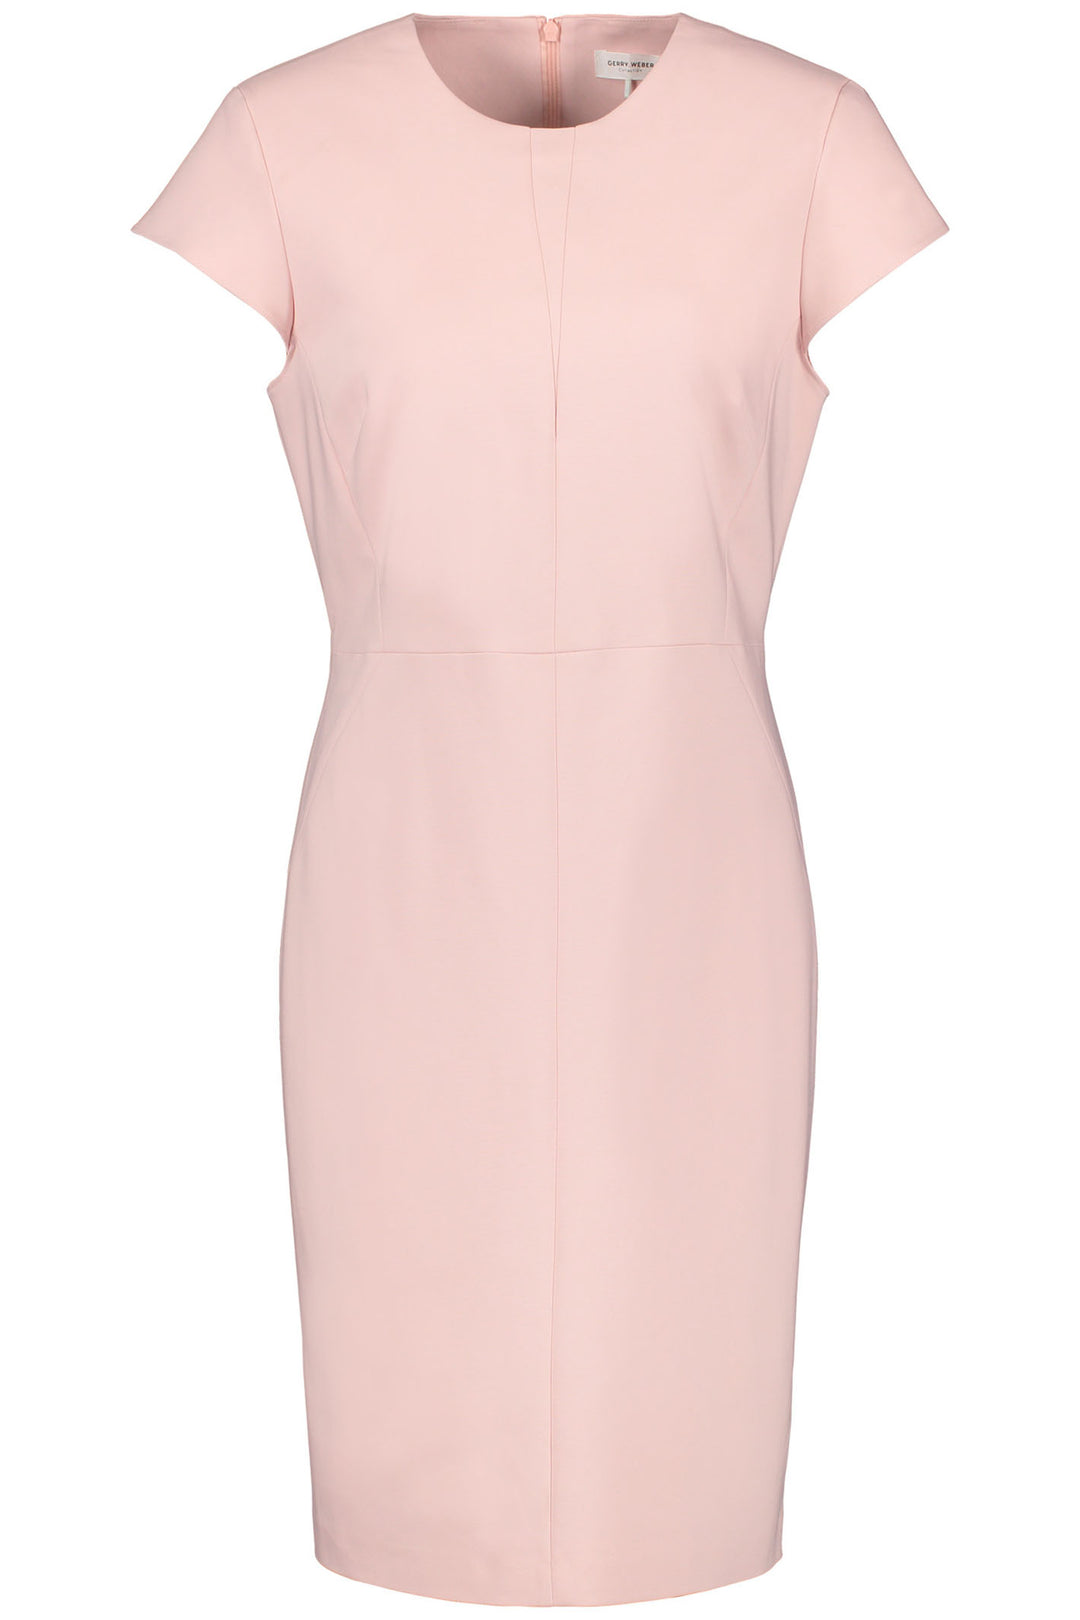 Gerry Weber 380031 Lotus Pink Shift Dress - Experience Boutique